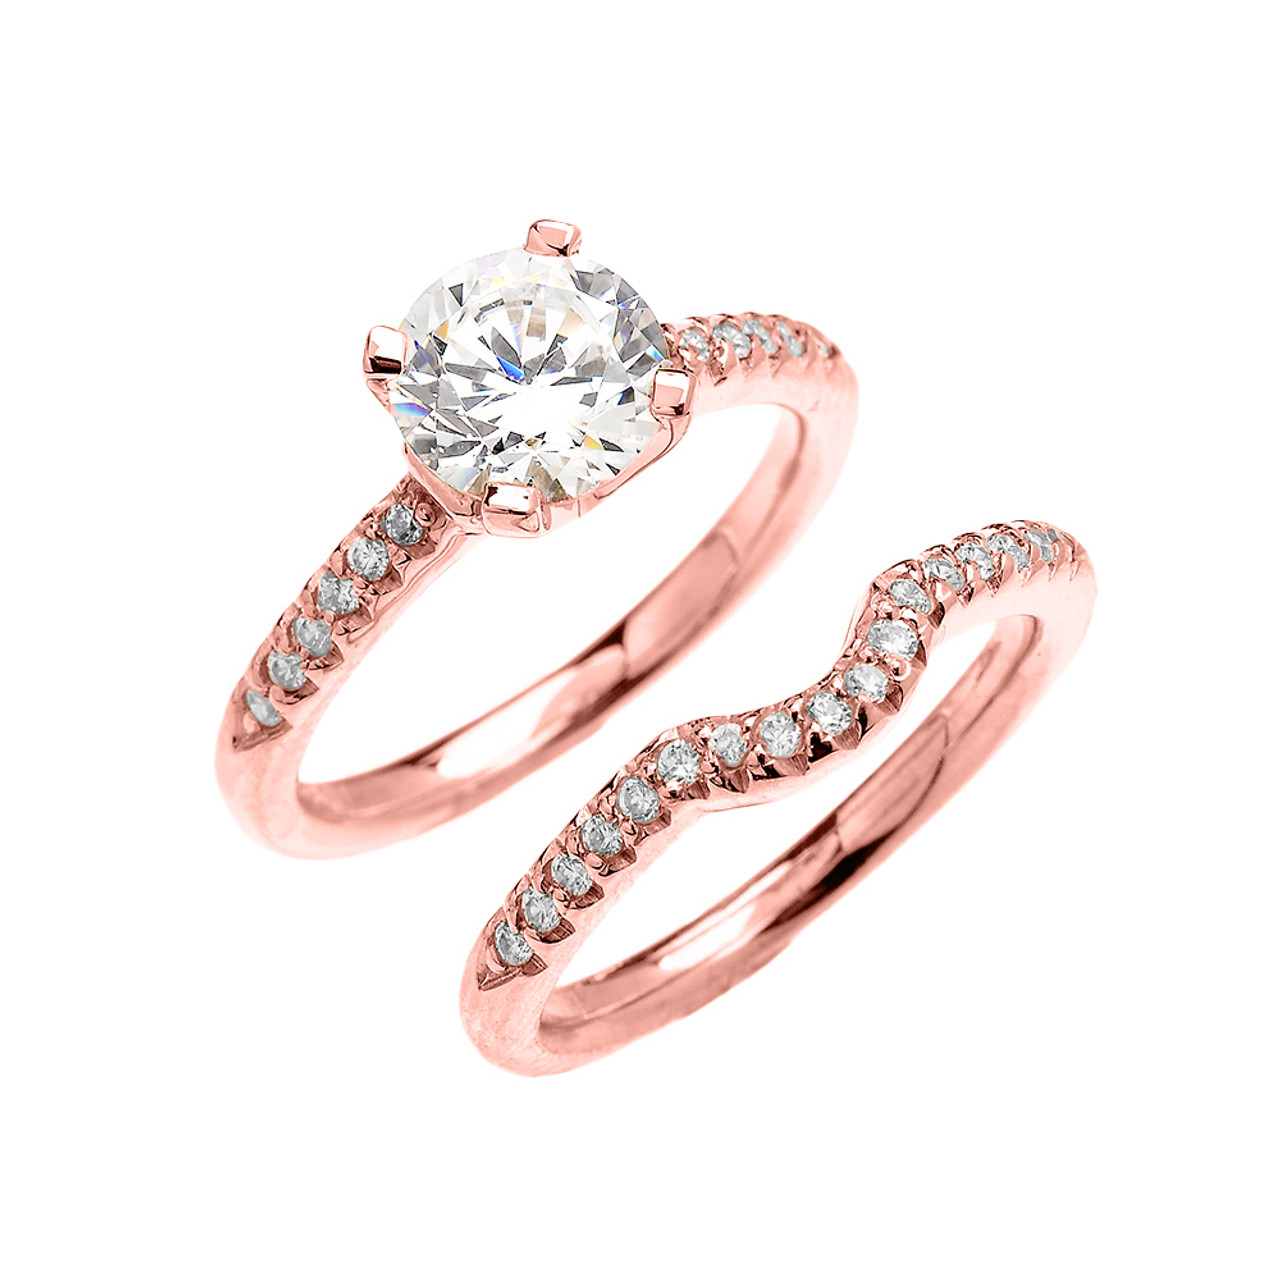 Rose Gold Dainty Round Cubic Zirconia Solitaire Wedding Ring Set